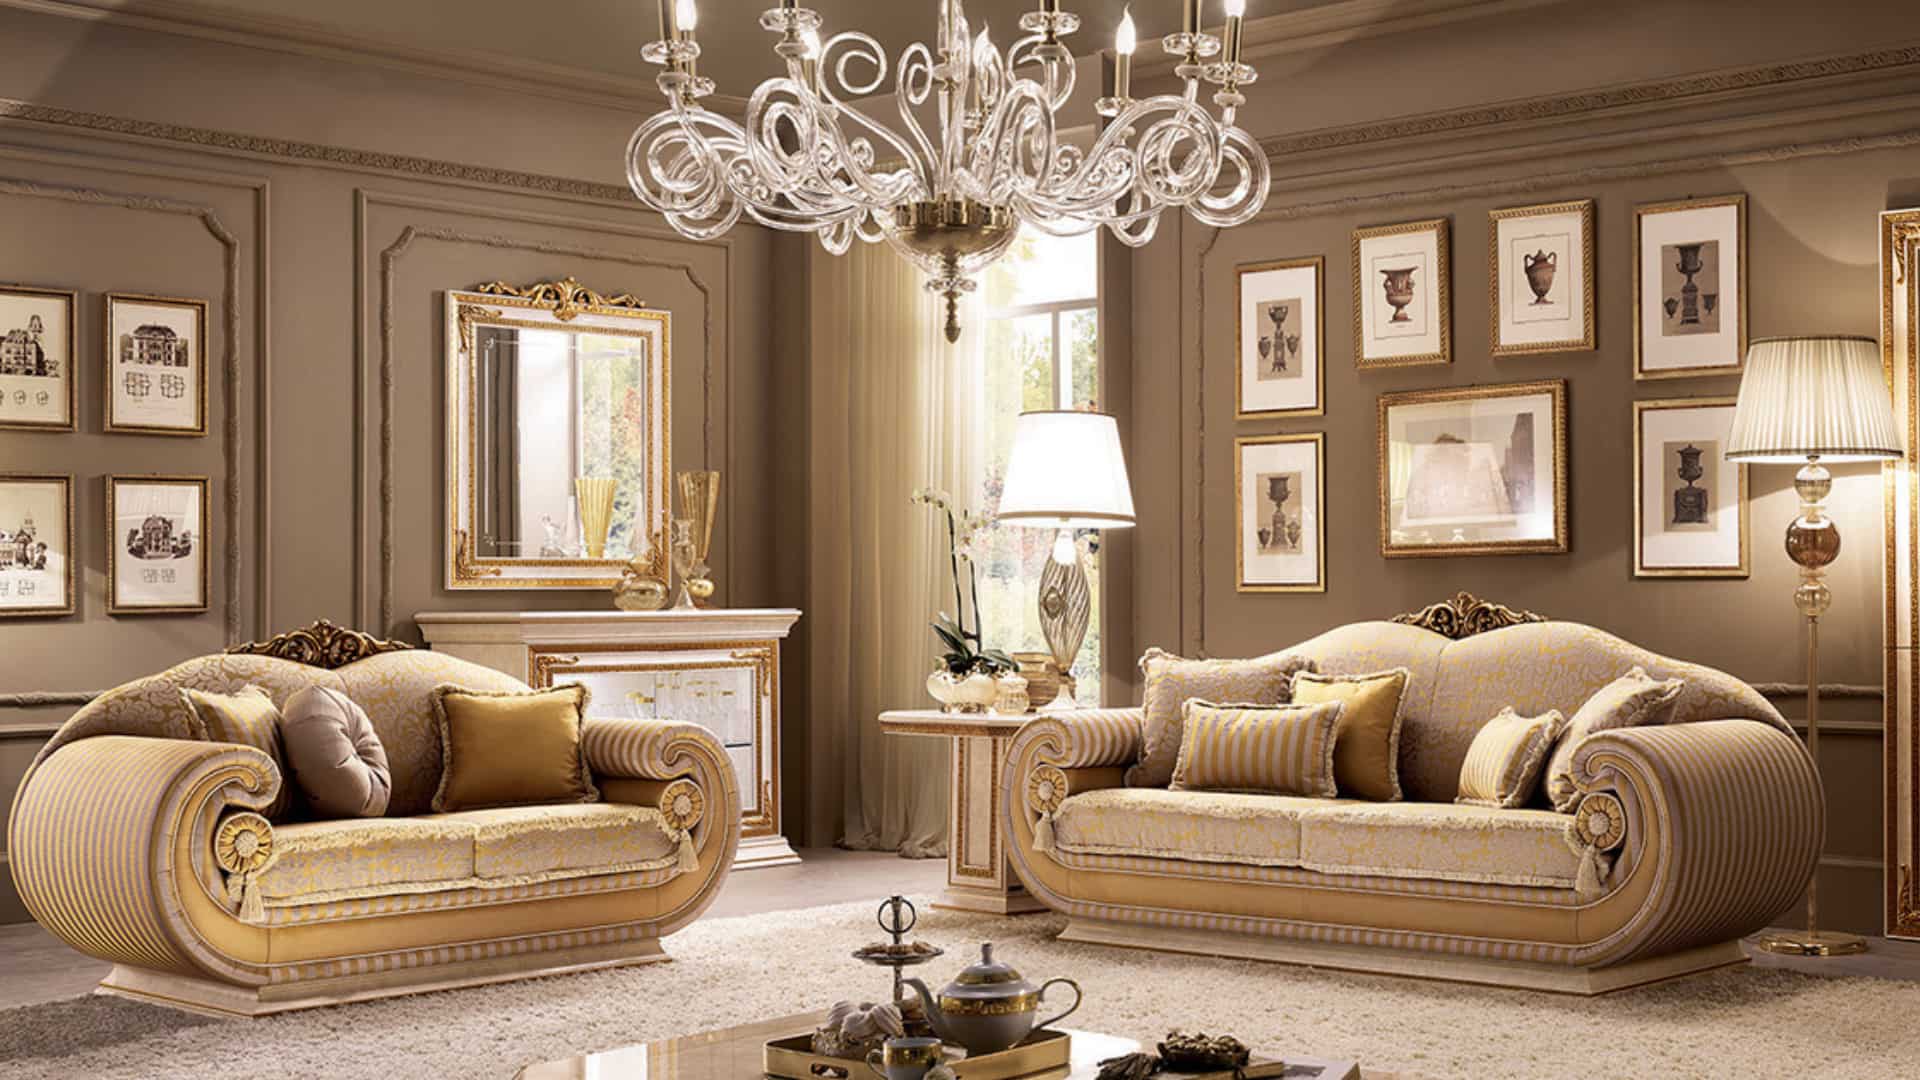 Renaissance furniture: useful tips when designing your living room